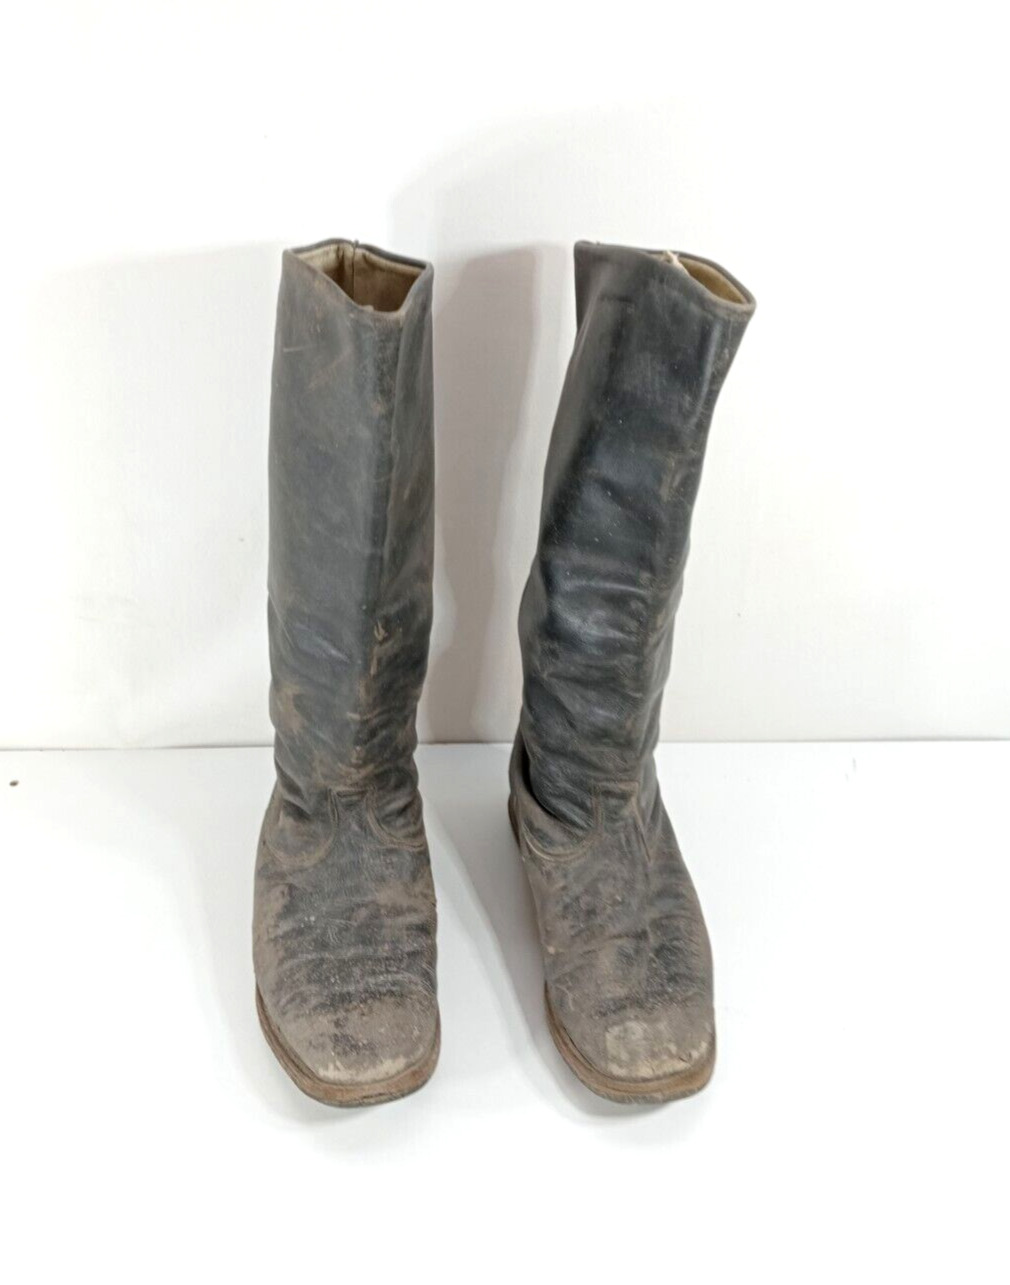 Barren Boots Officers Military USSR Boots Soviet Army Original